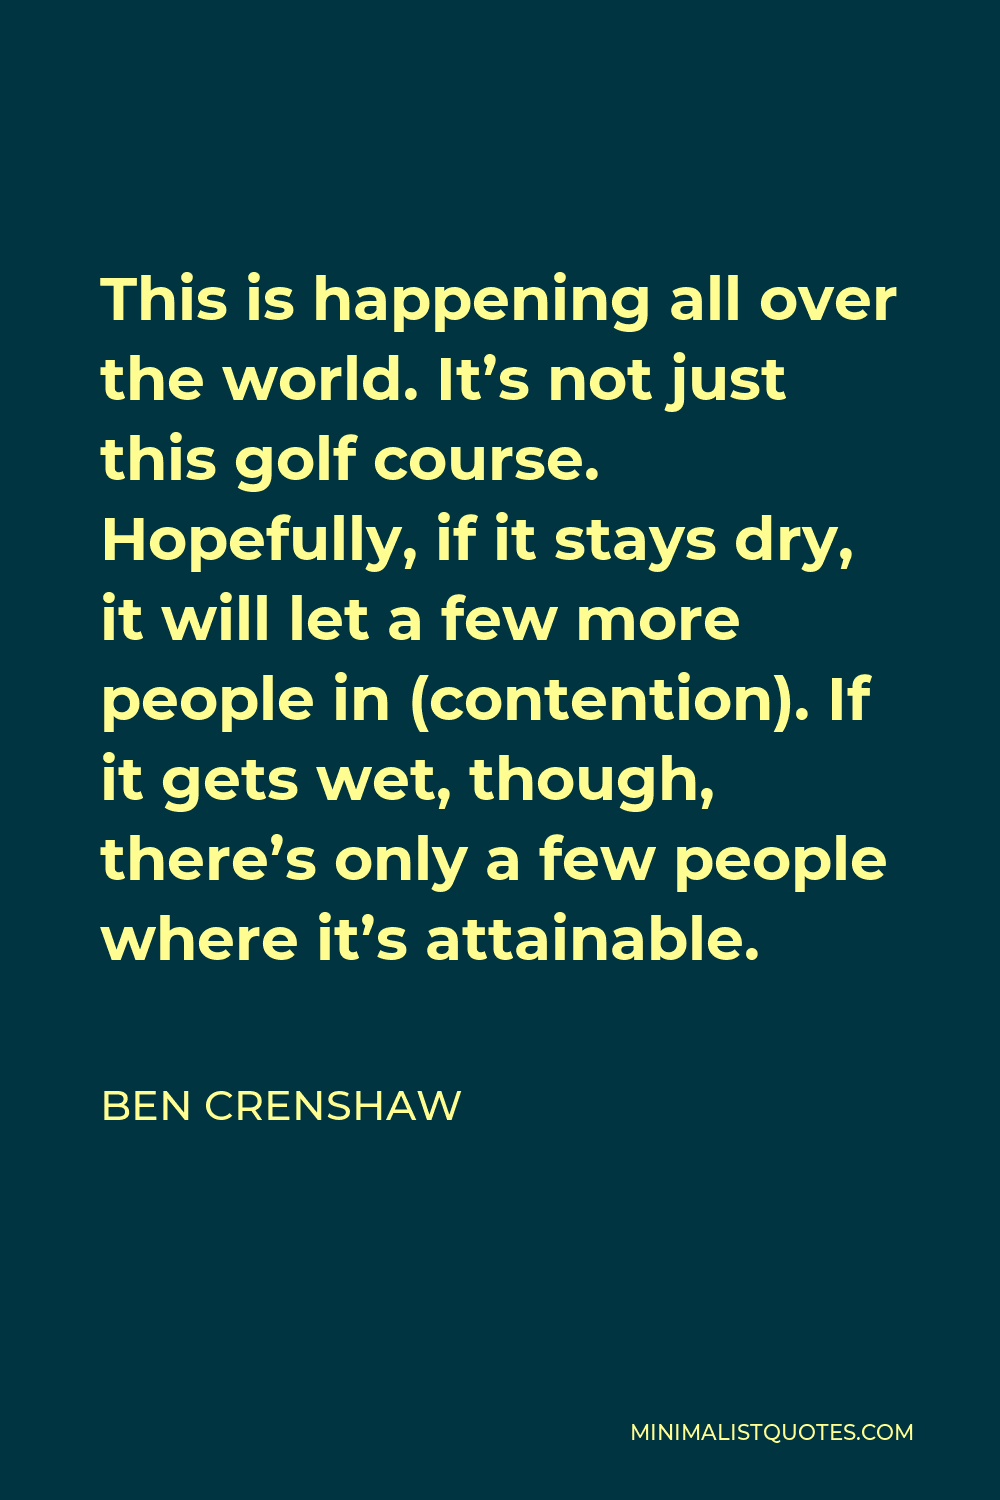 Ben Crenshaw Quote - This is happening all over the world. It’s not just this golf course. Hopefully, if it stays dry, it will let a few more people in (contention). If it gets wet, though, there’s only a few people where it’s attainable.